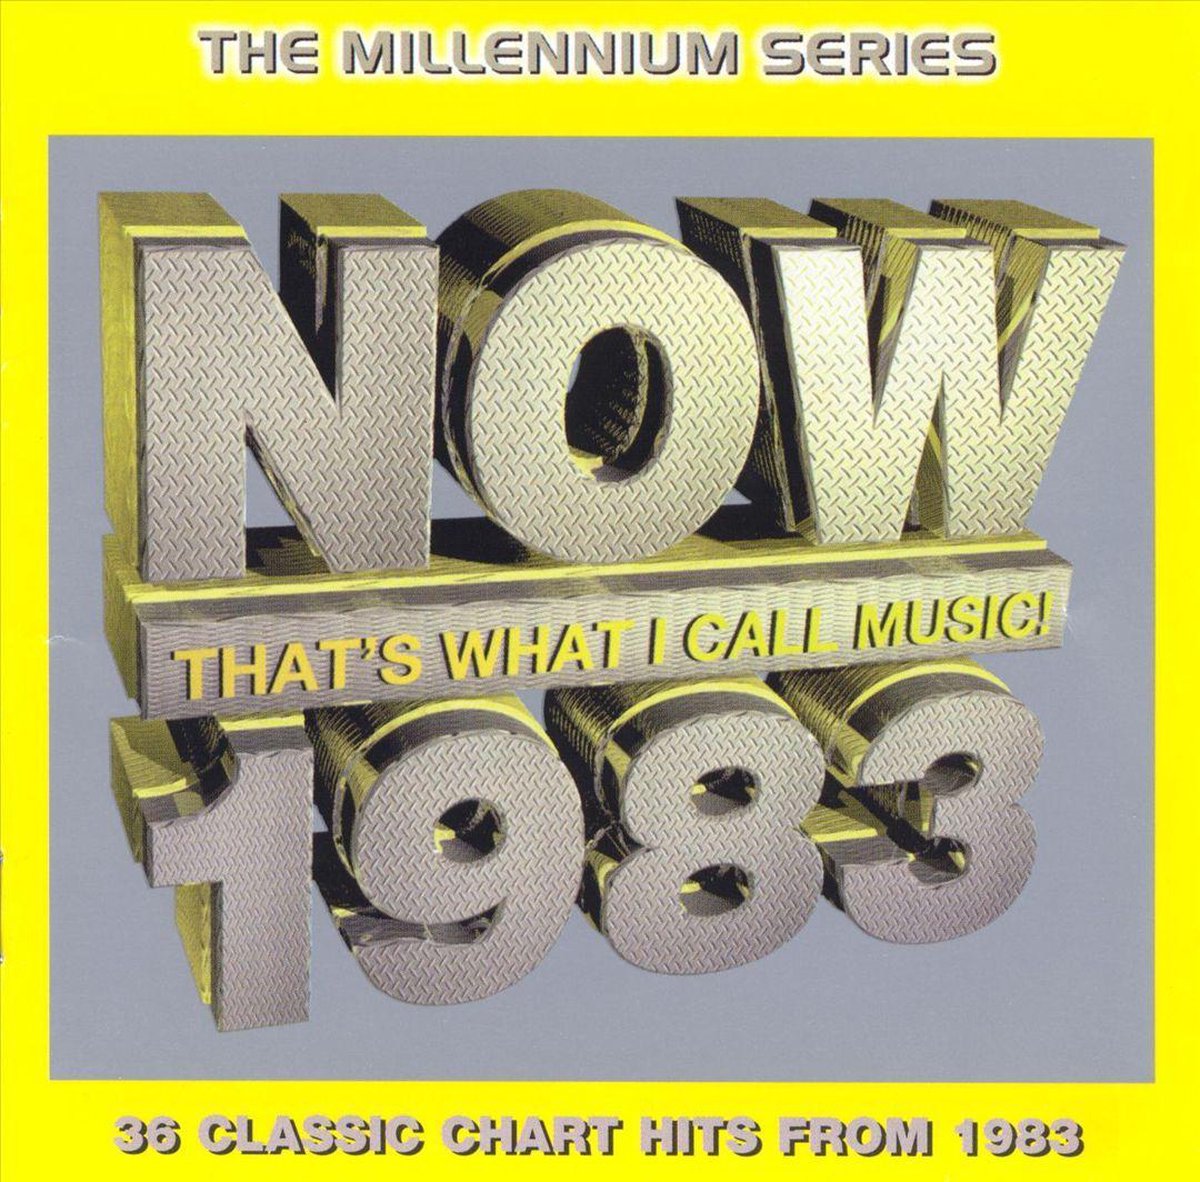 Now That's What I Call Music! 1983 - various artists